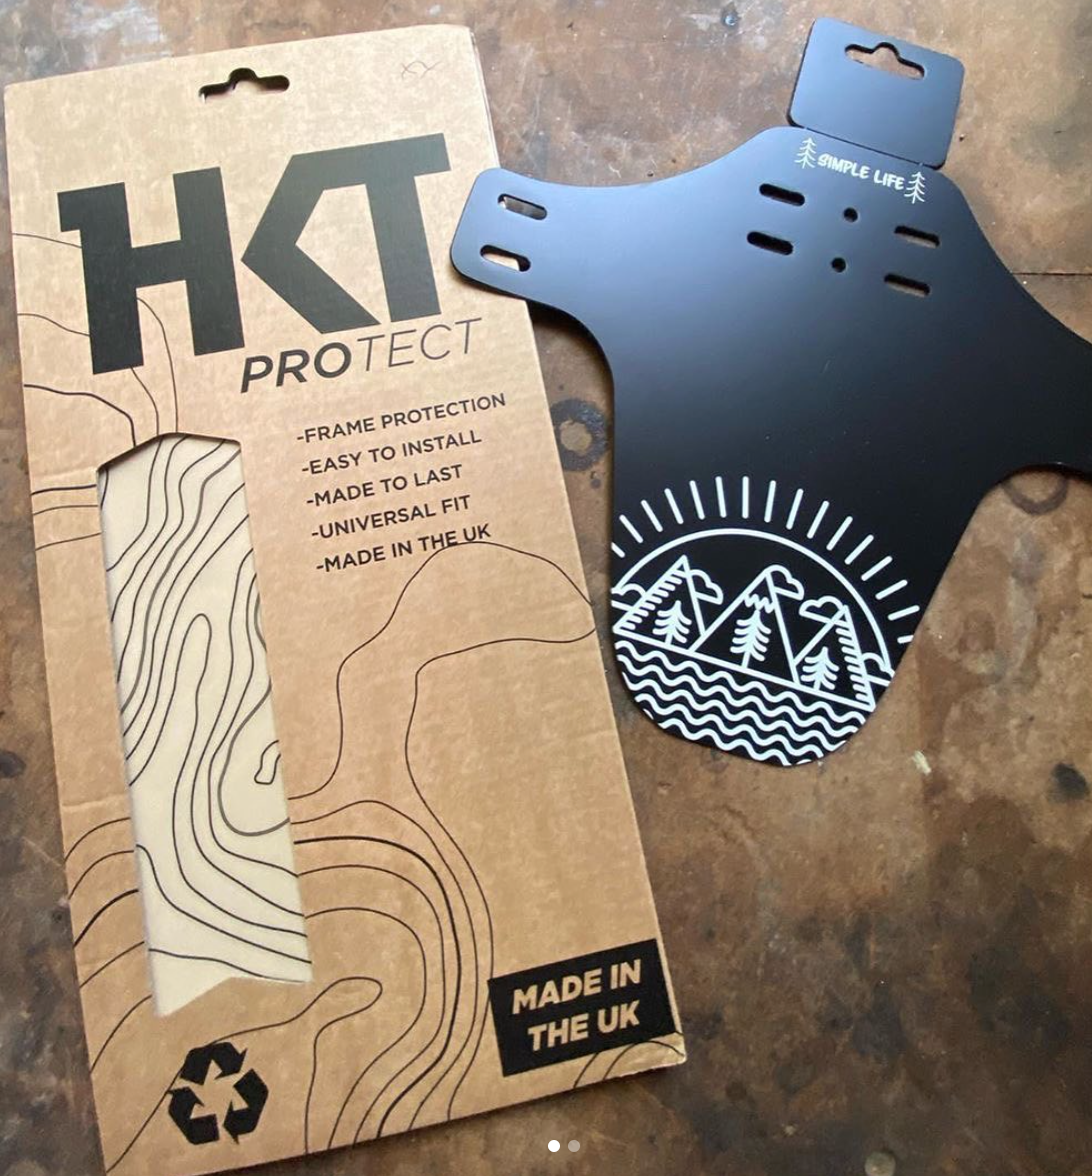 Frame Protection Kit [XL] - By HKT Protect // Contour